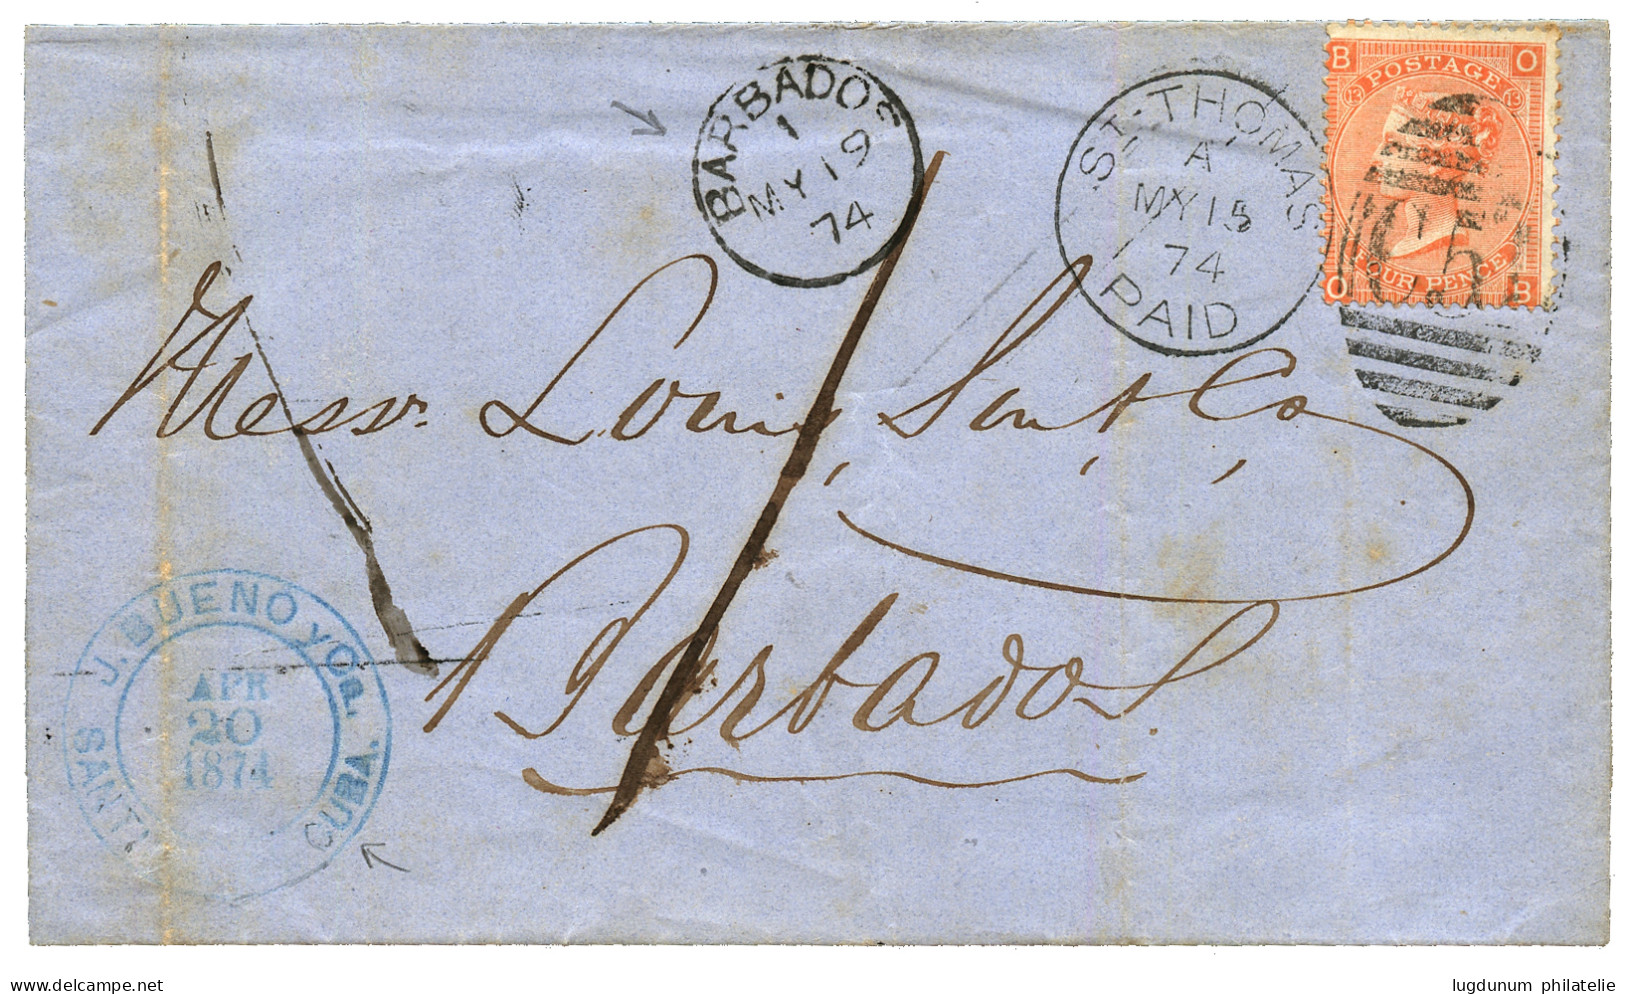 "CUBA Via DANISH WEST INDIES To BARBADOS" : 1874 4d Canc. C51 + ST THOMAS PAID + "1" Tax Marking + BARBADOS Cds On Cover - Deens West-Indië